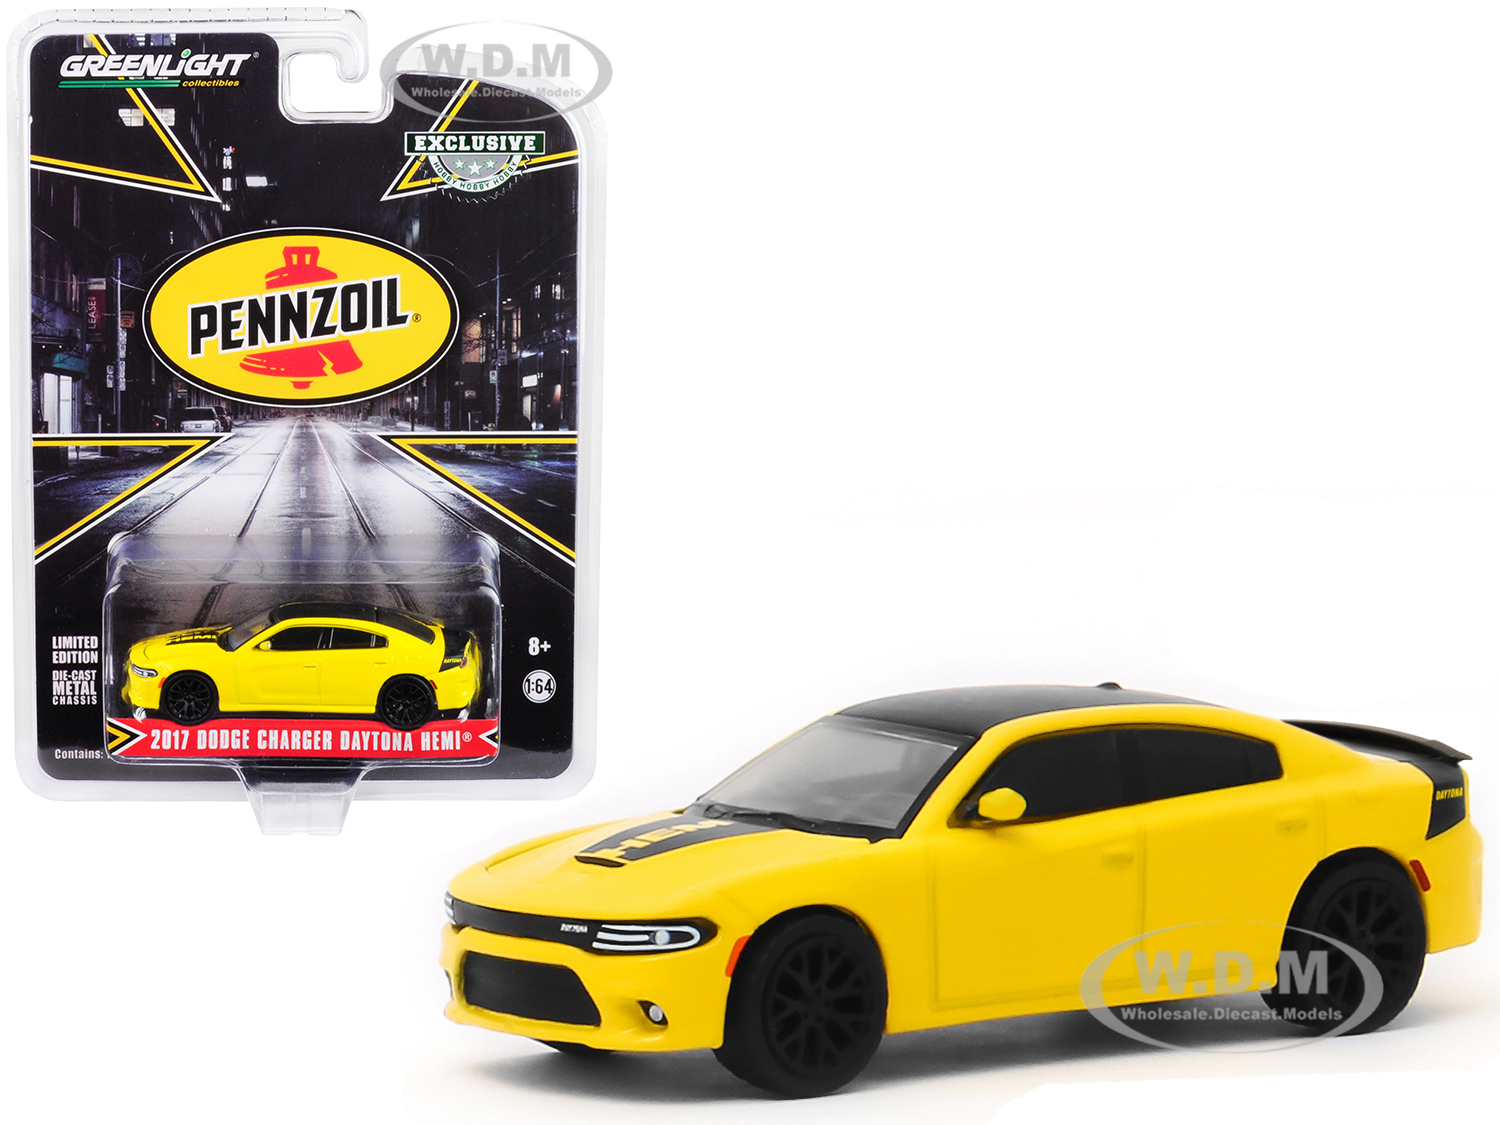 2017 Dodge Charger Daytona Hemi Yellow With Black Top "pennzoil" Advertisement Car "hobby Exclusive" 1/64 Diecast Model Car By Greenlight